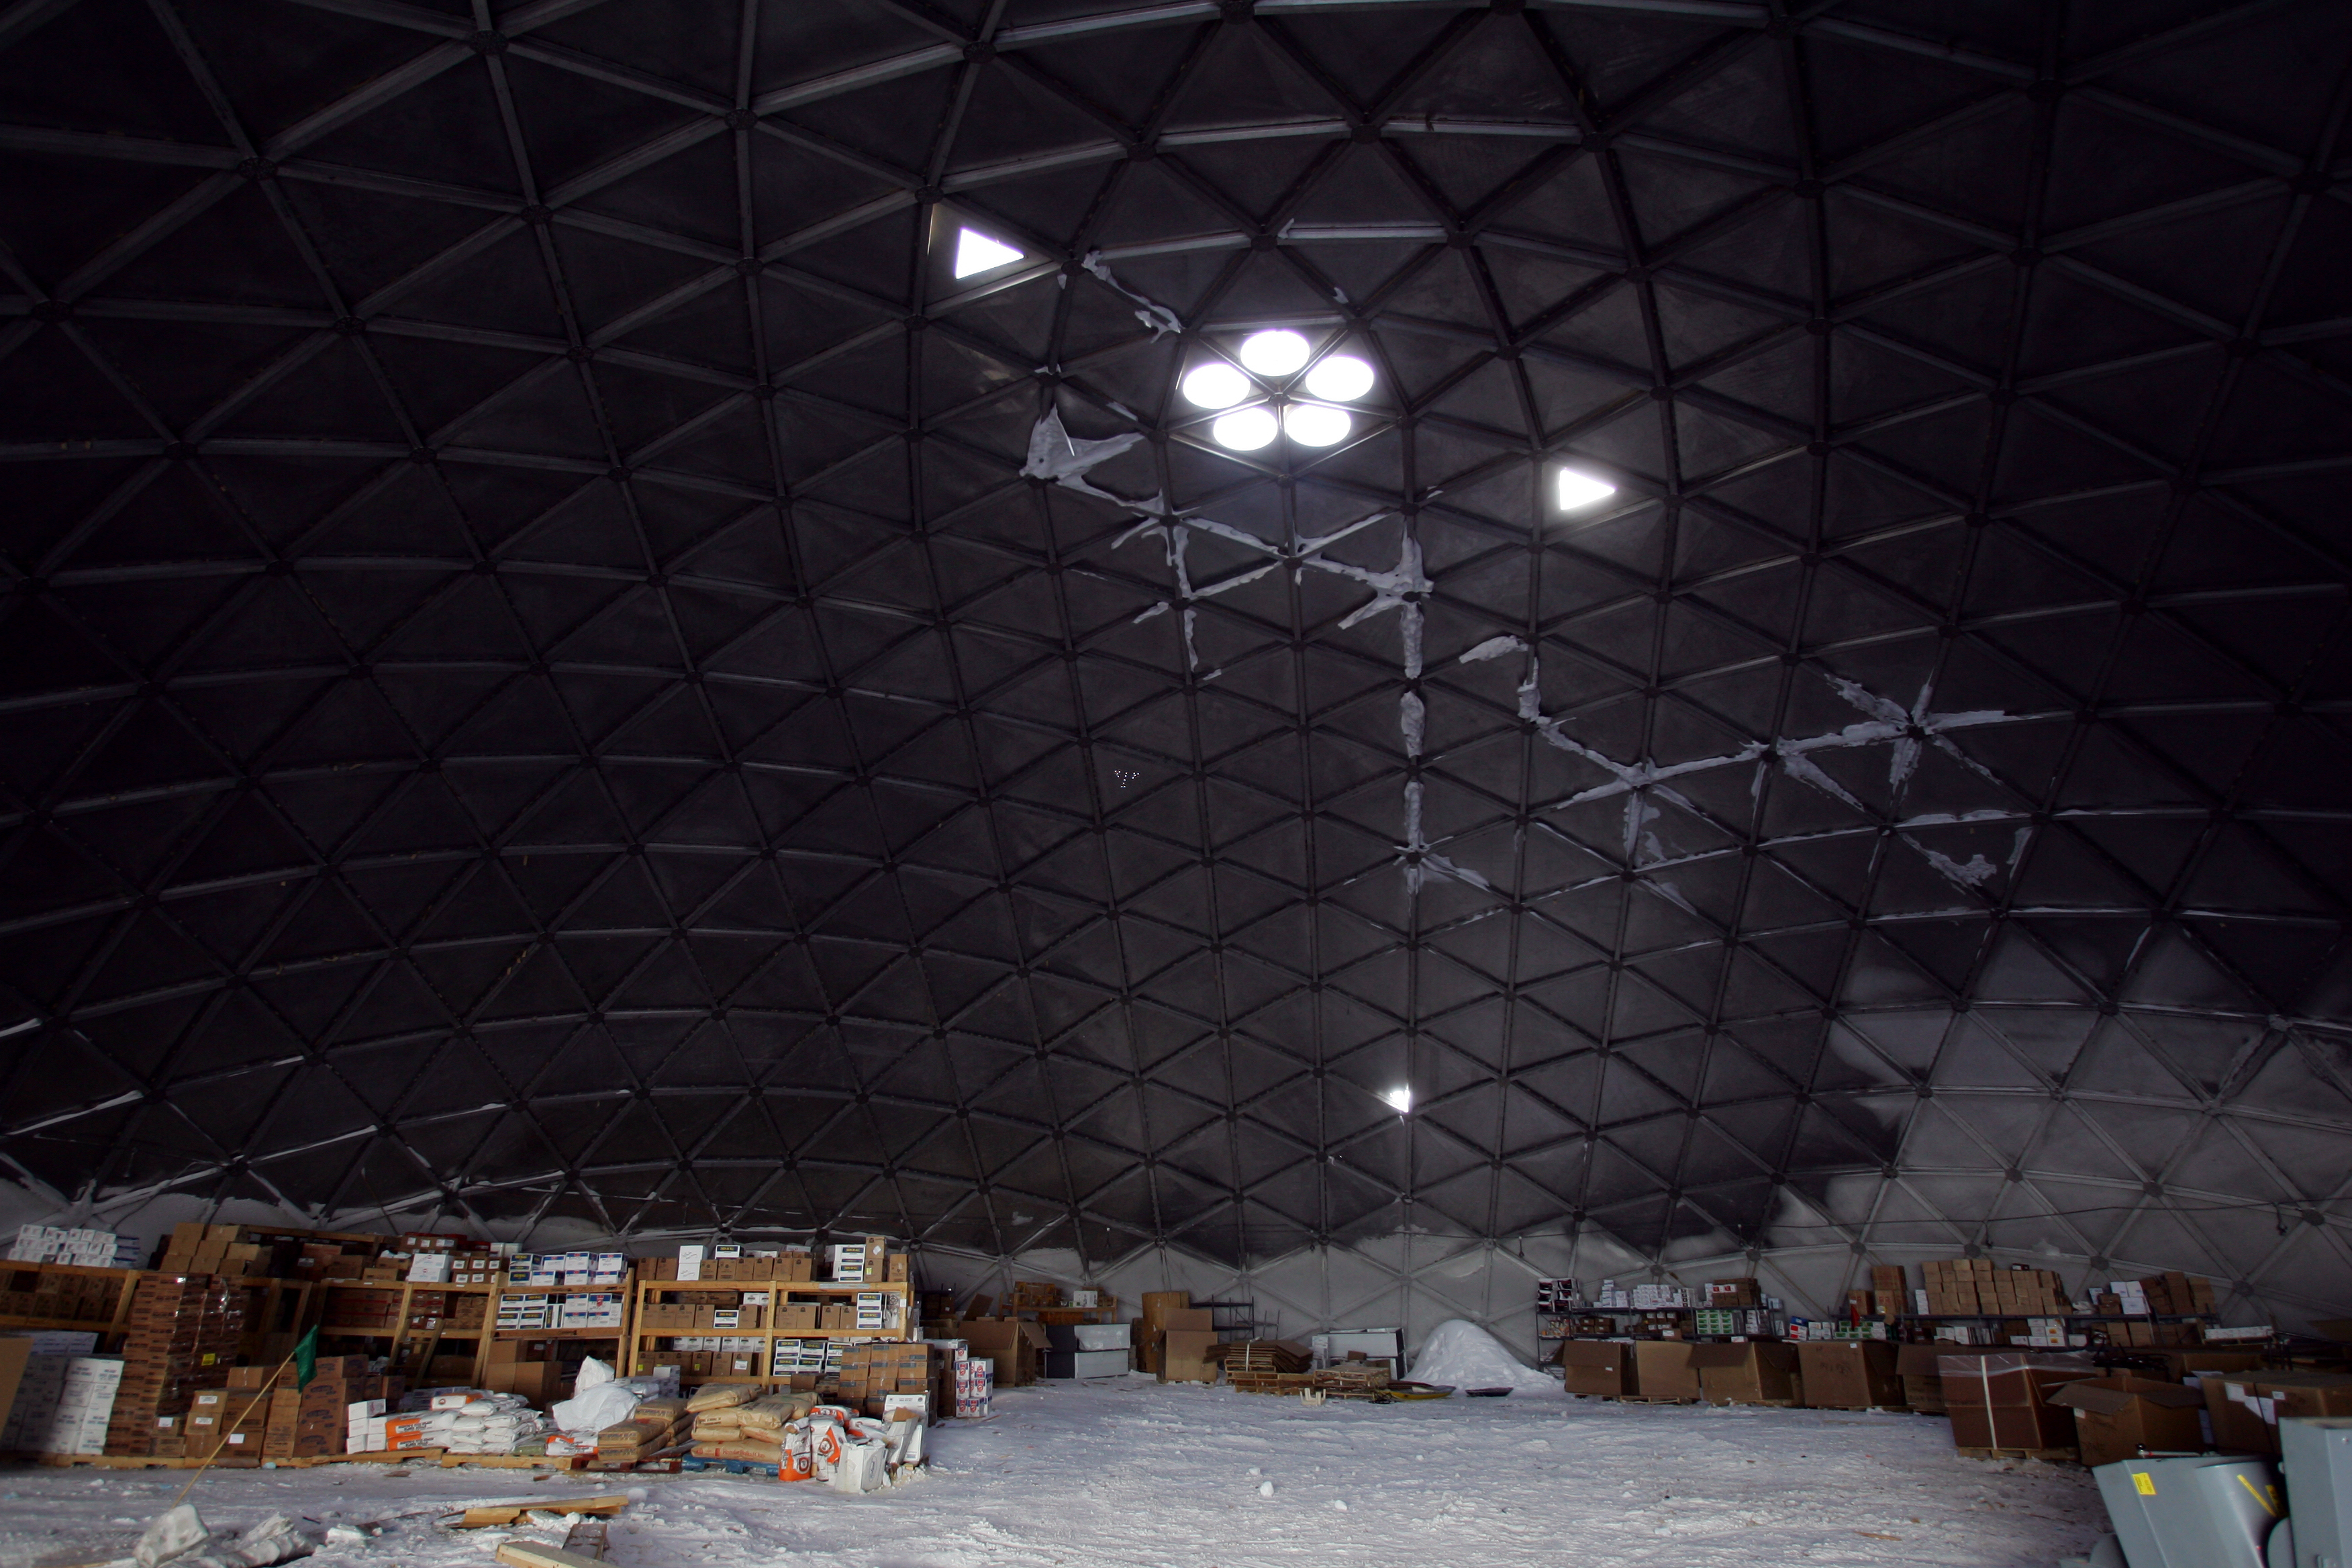 Cargo pallets under a domed roof.